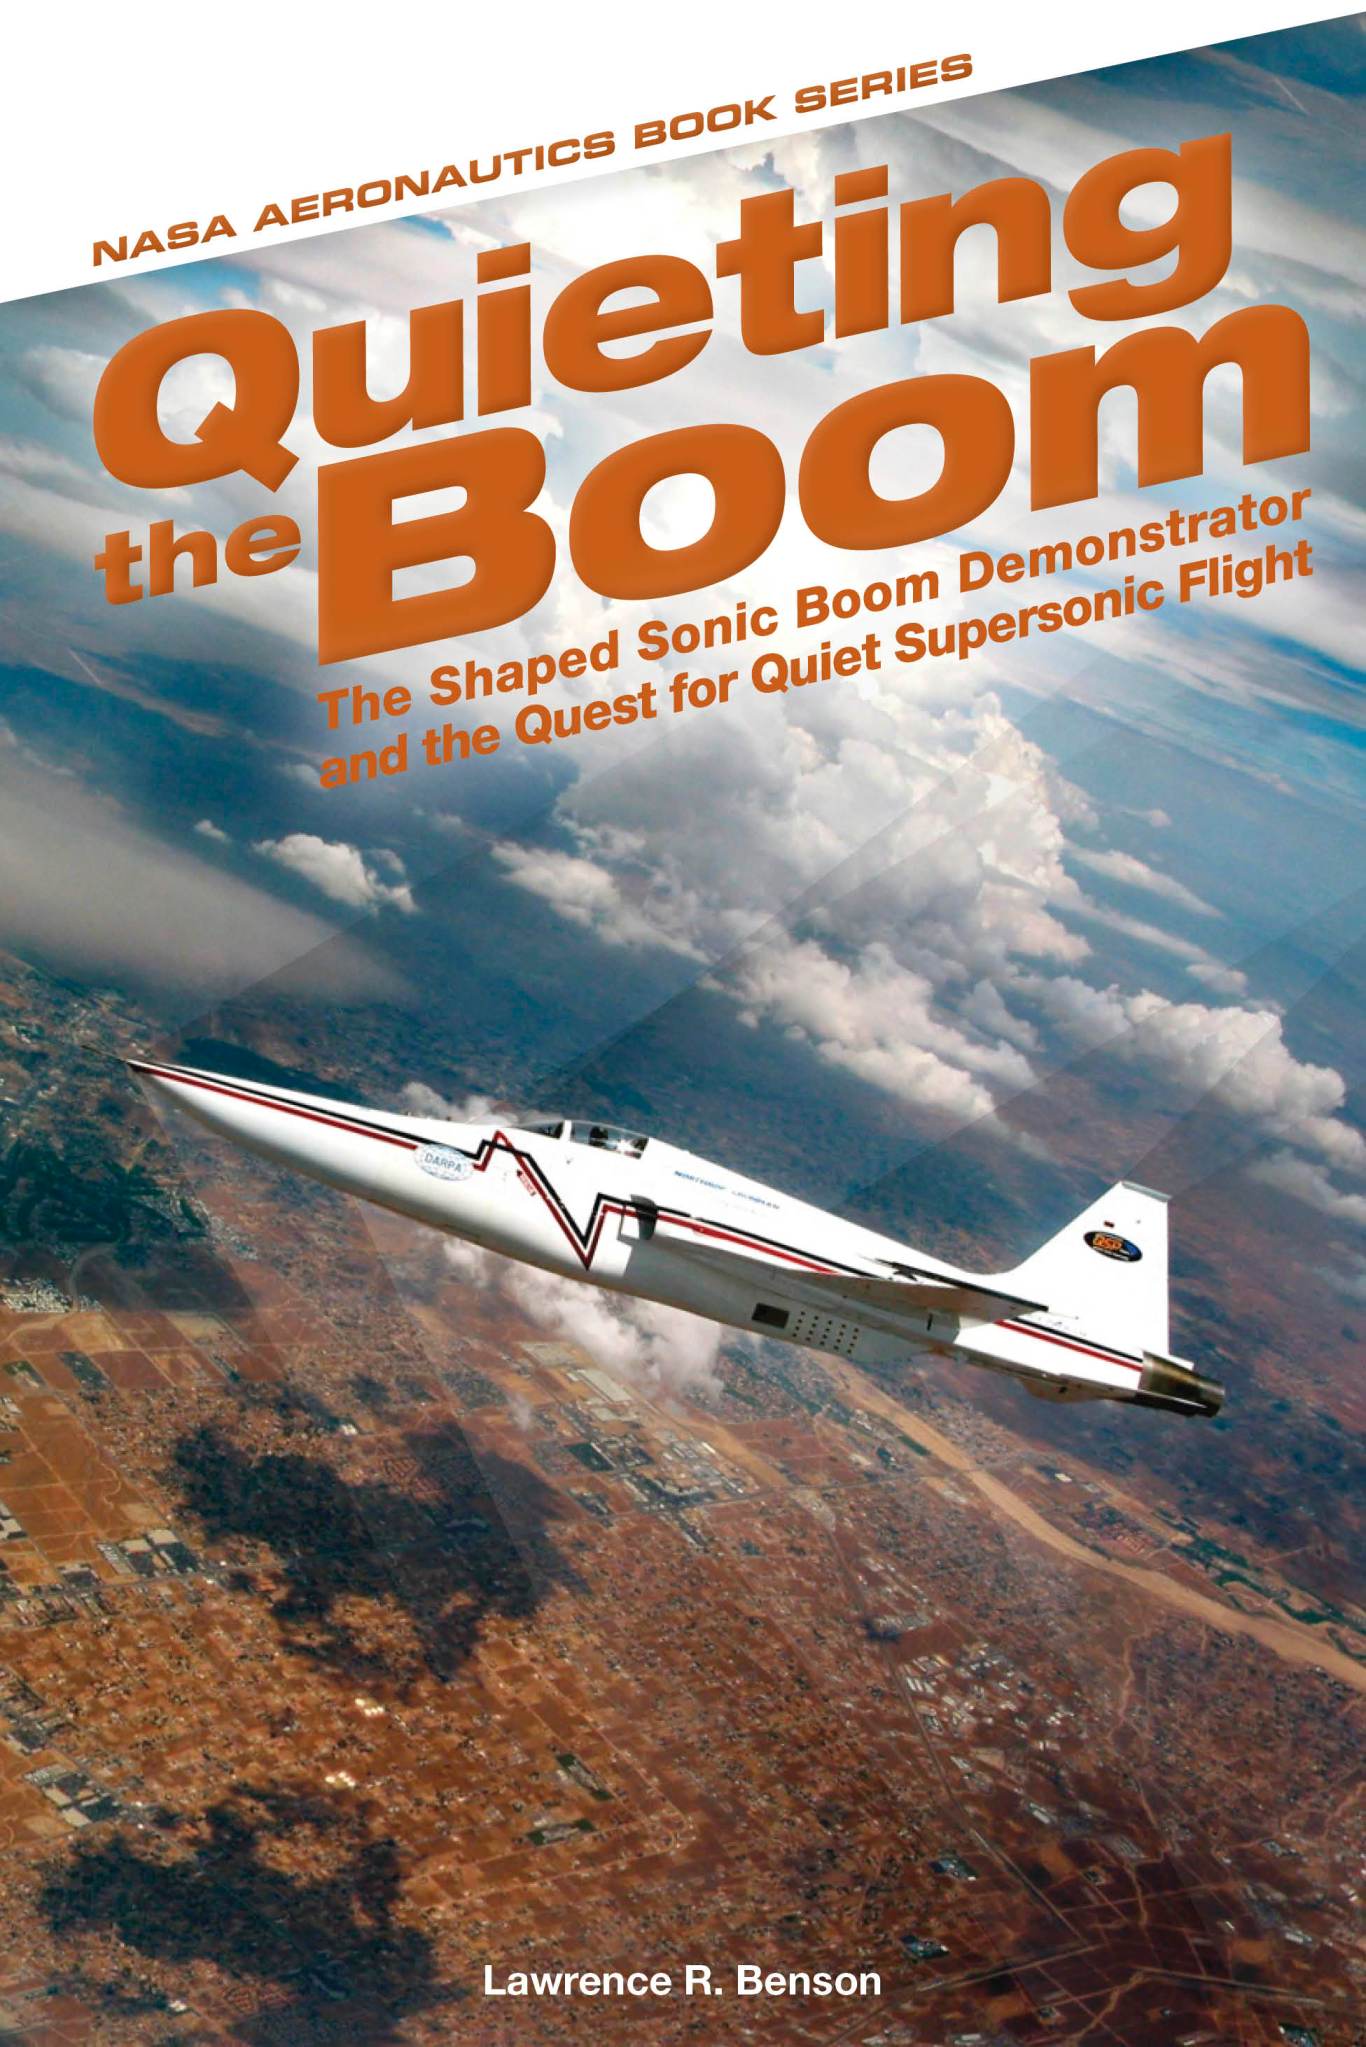 Quieting the Boom book cover.